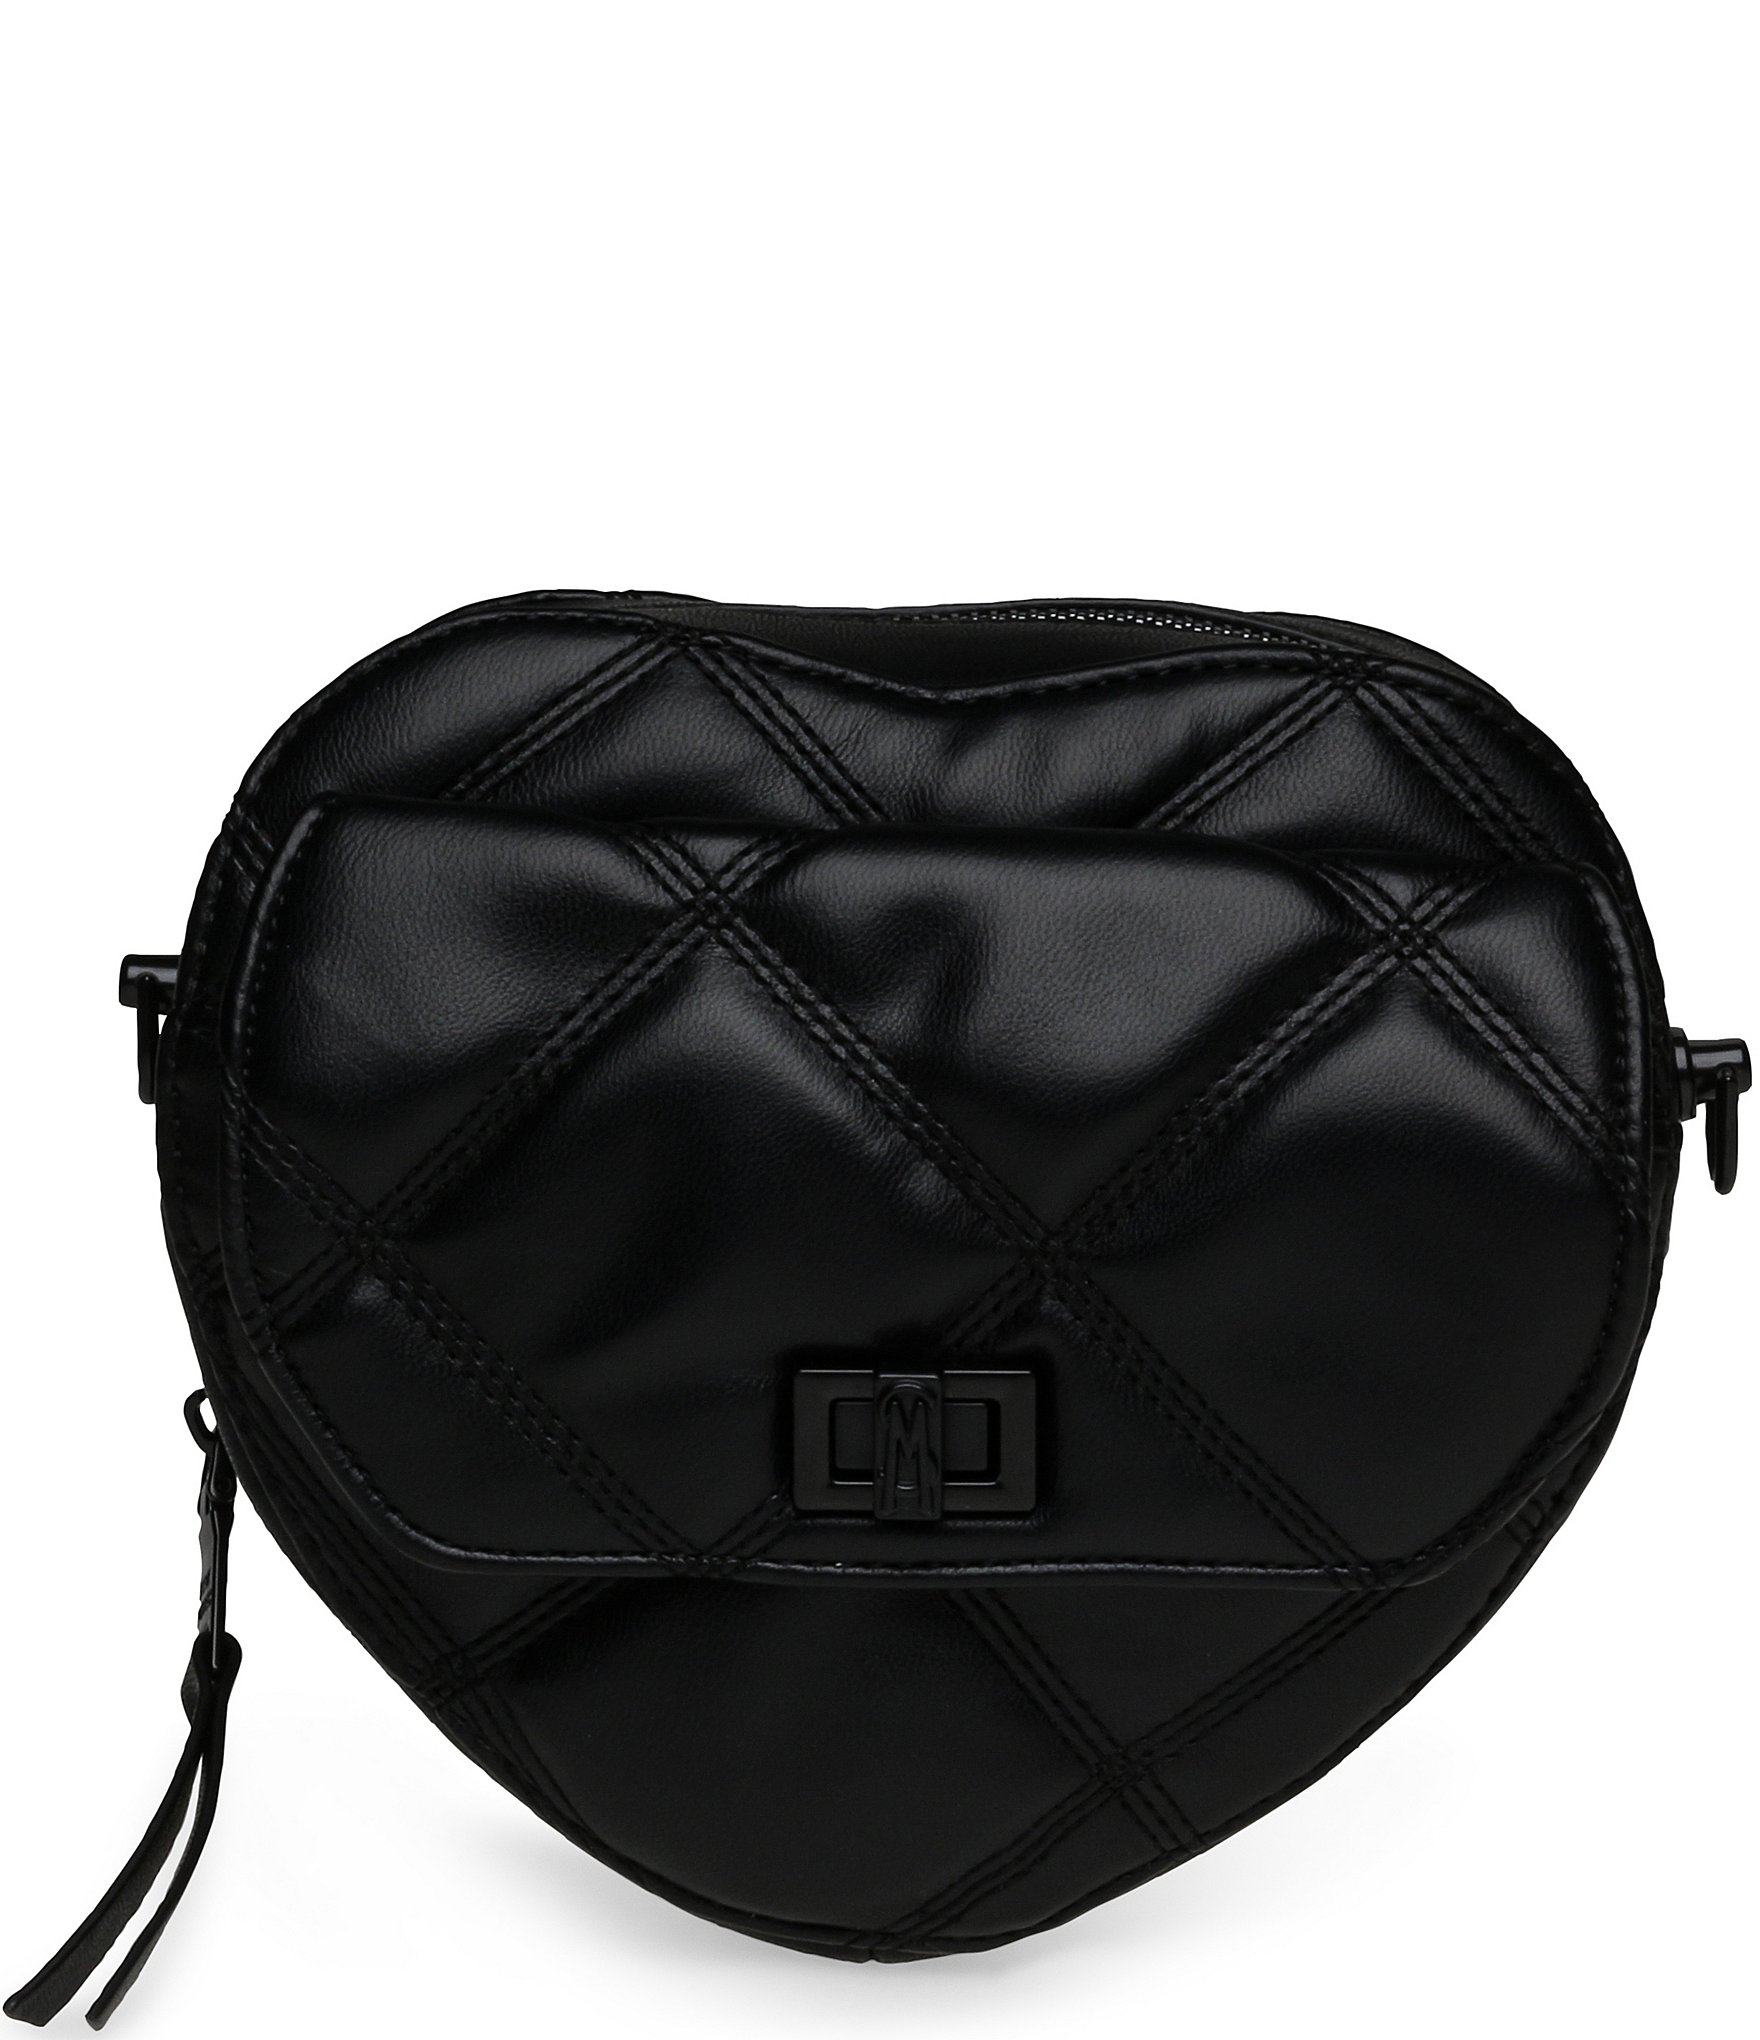 Steve Madden Purse Crossbody Quilted Belian Black Retail $88 New w Tags